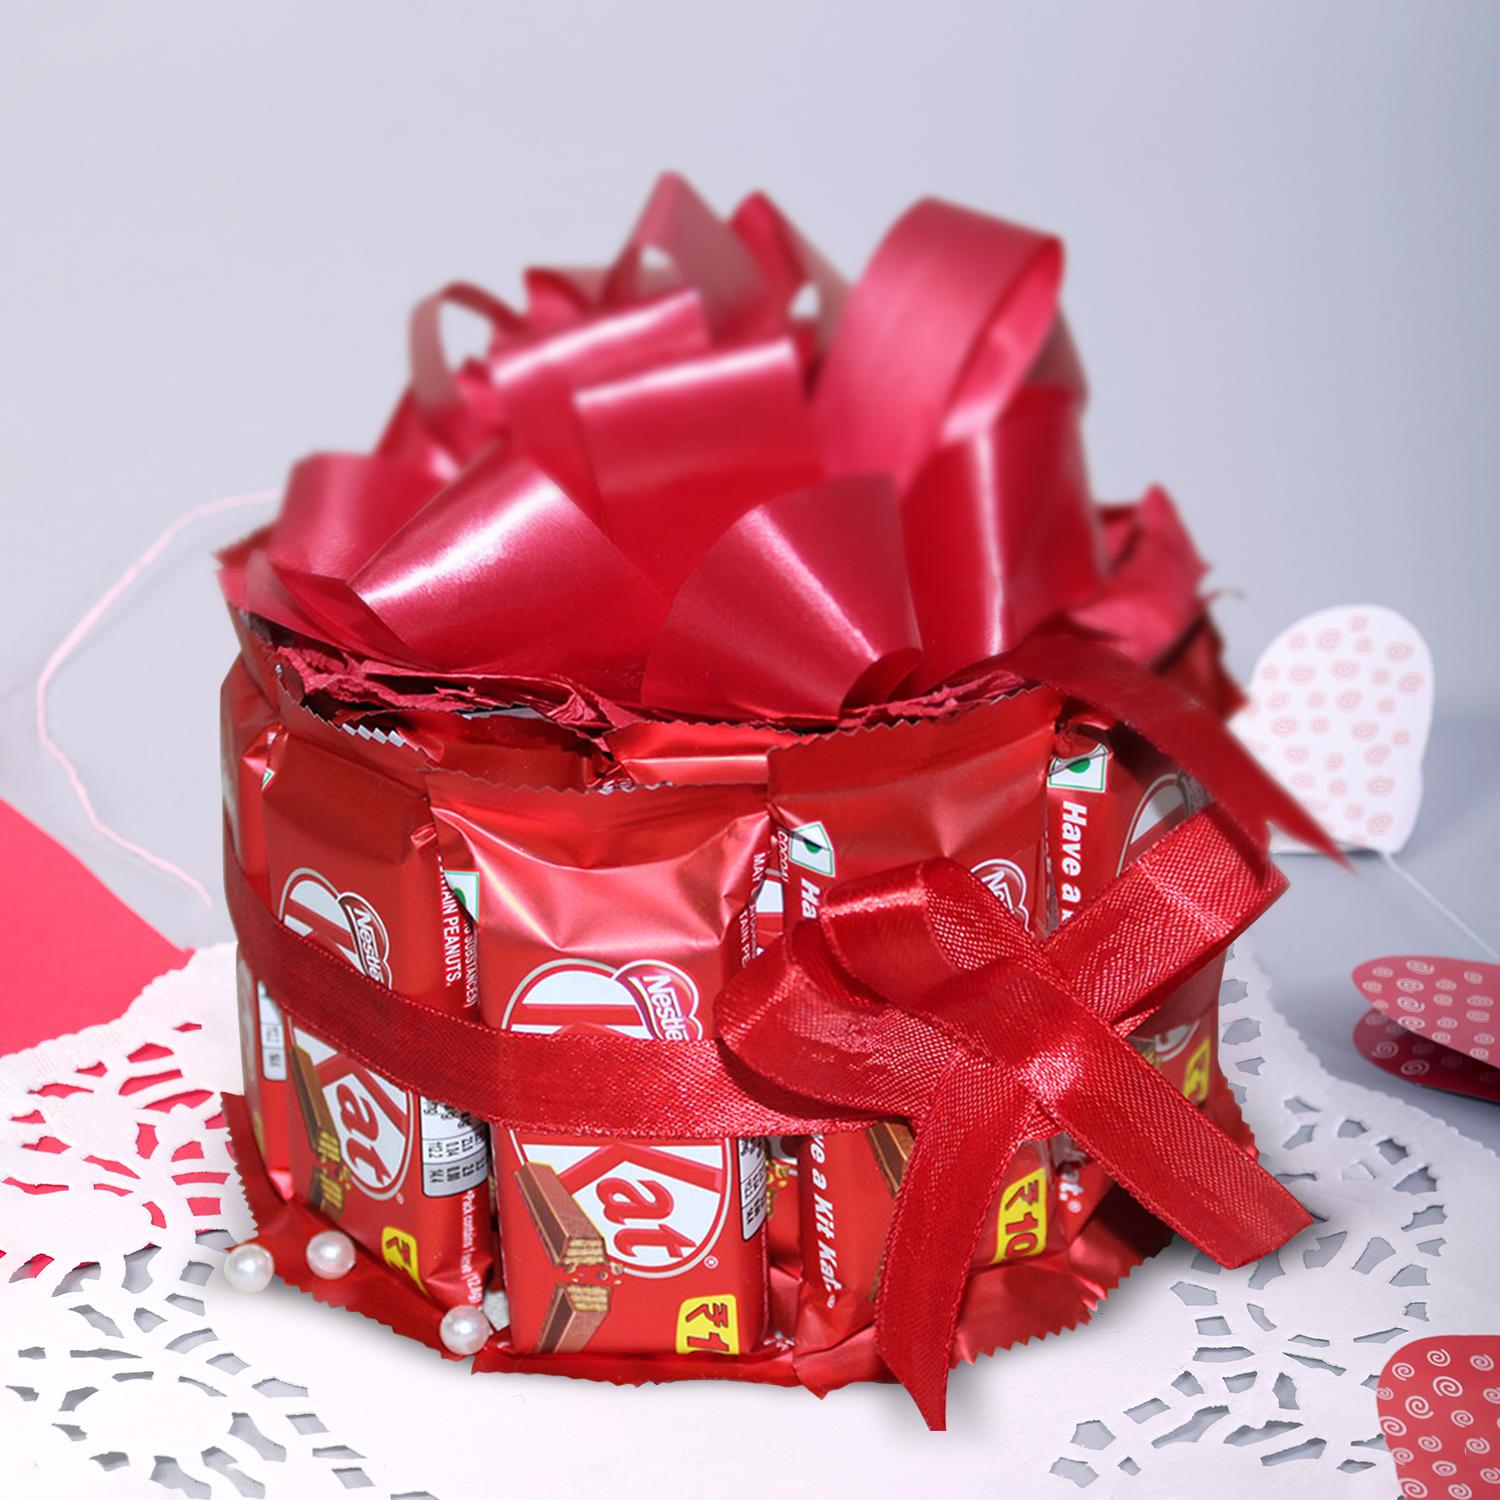 Gift Delivery in Pune | Online Gifts in Pune - Giftcart.com